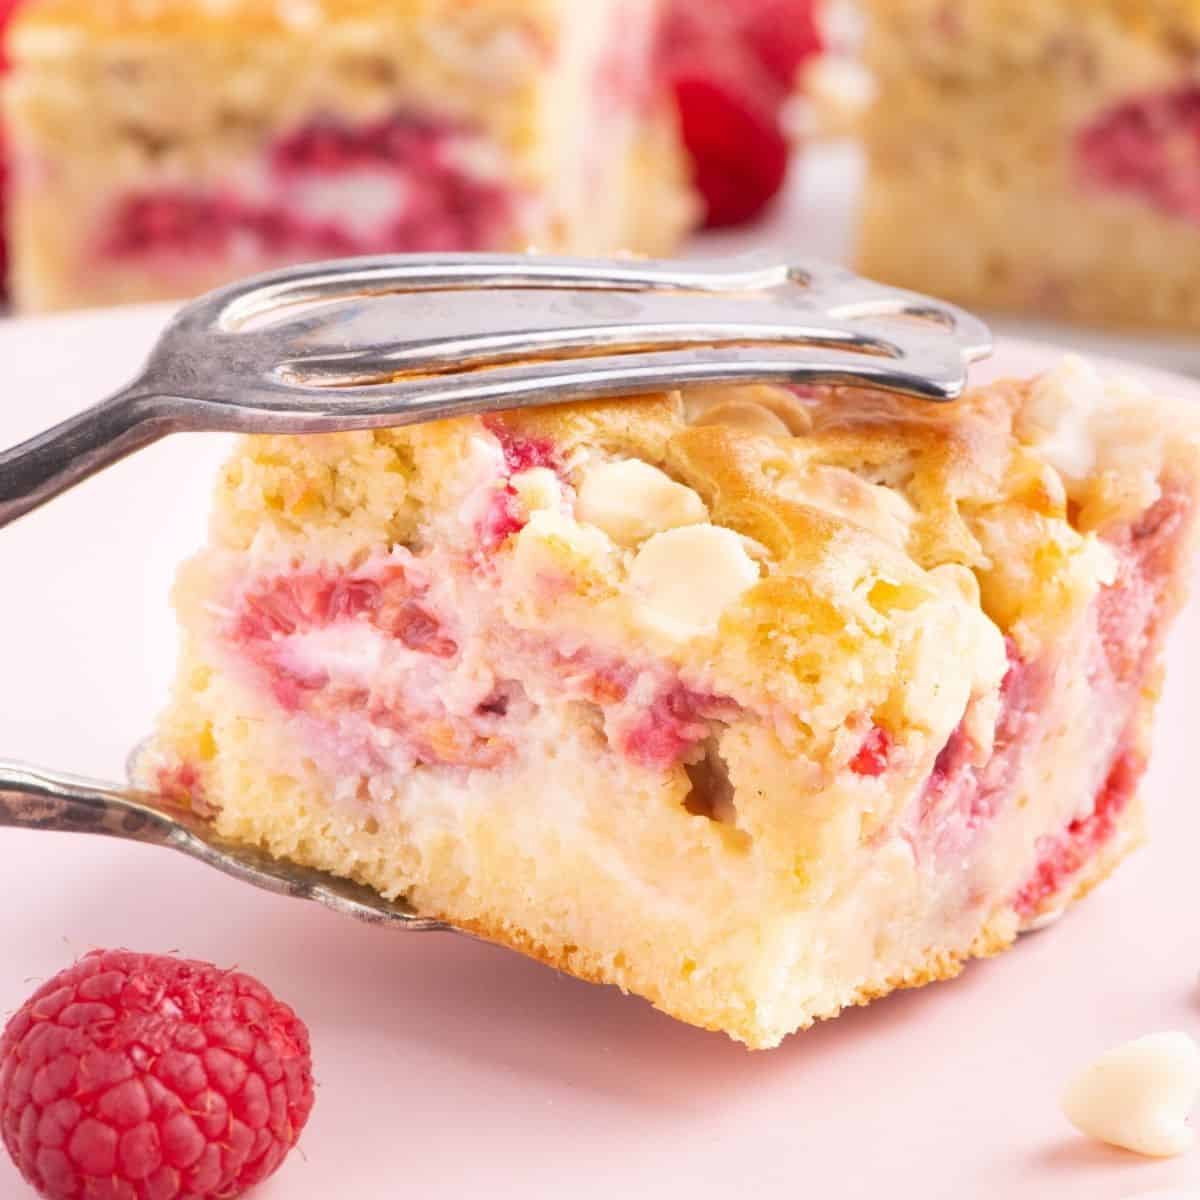 Sugar Free Raspberry Coffee Cake, an easy and delicious breakfast, brunch, or dessert recipe made with fresh raspberries and no added sugar.